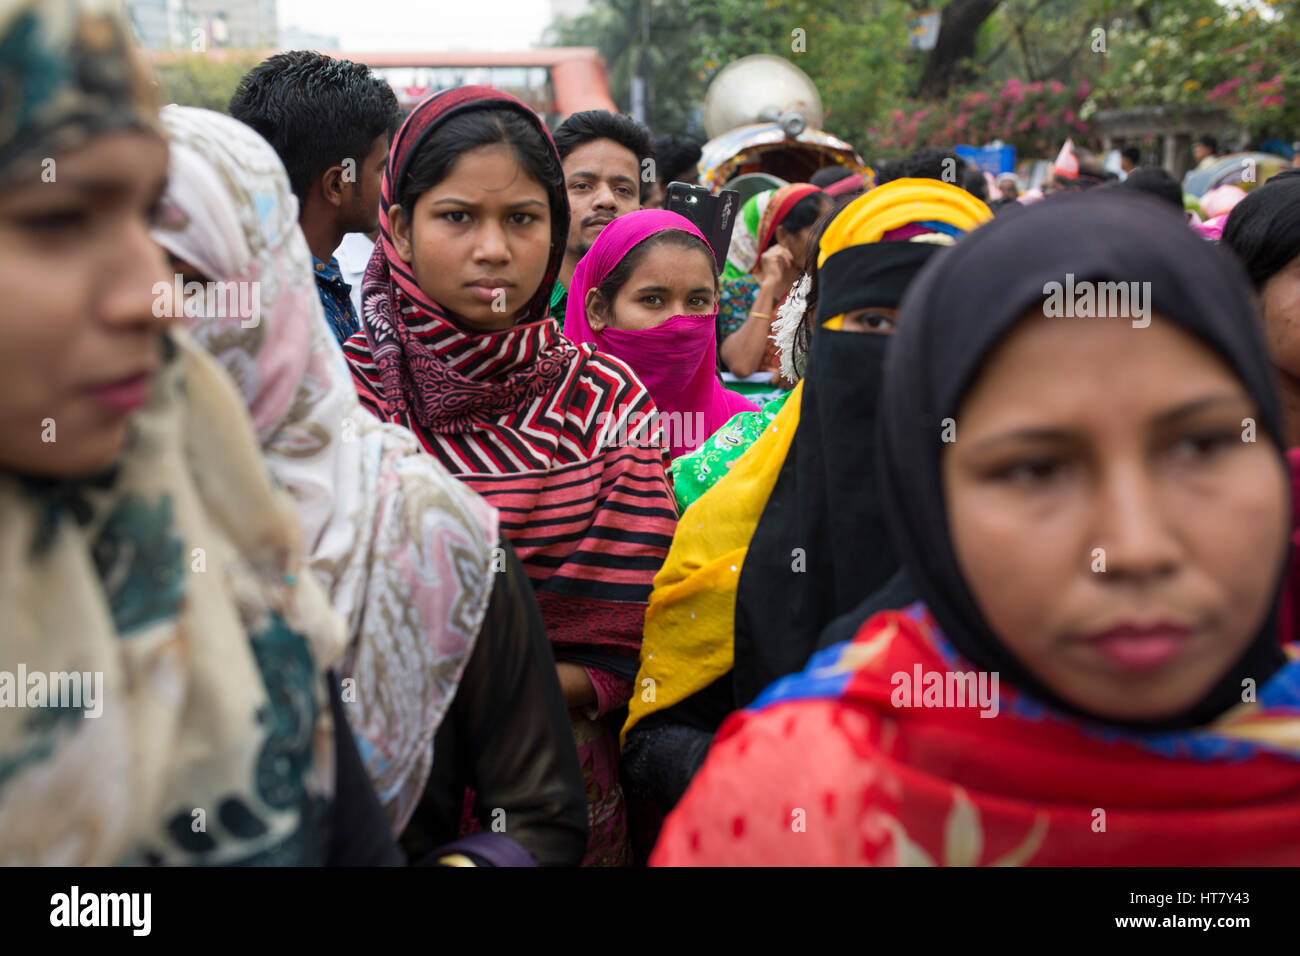 Dhaka, Bangladesh. 8th March 2017. Bangladeshi activists and garment workers attend a rally in front of National Press Club during International Women's Day in Dhaka, Bangladesh on March 08, 2017. Several women's organization demanded equal treatment, improvement of work safety conditions and measures to tackle violence against women. Credit: zakir hossain chowdhury zakir/Alamy Live News Stock Photo